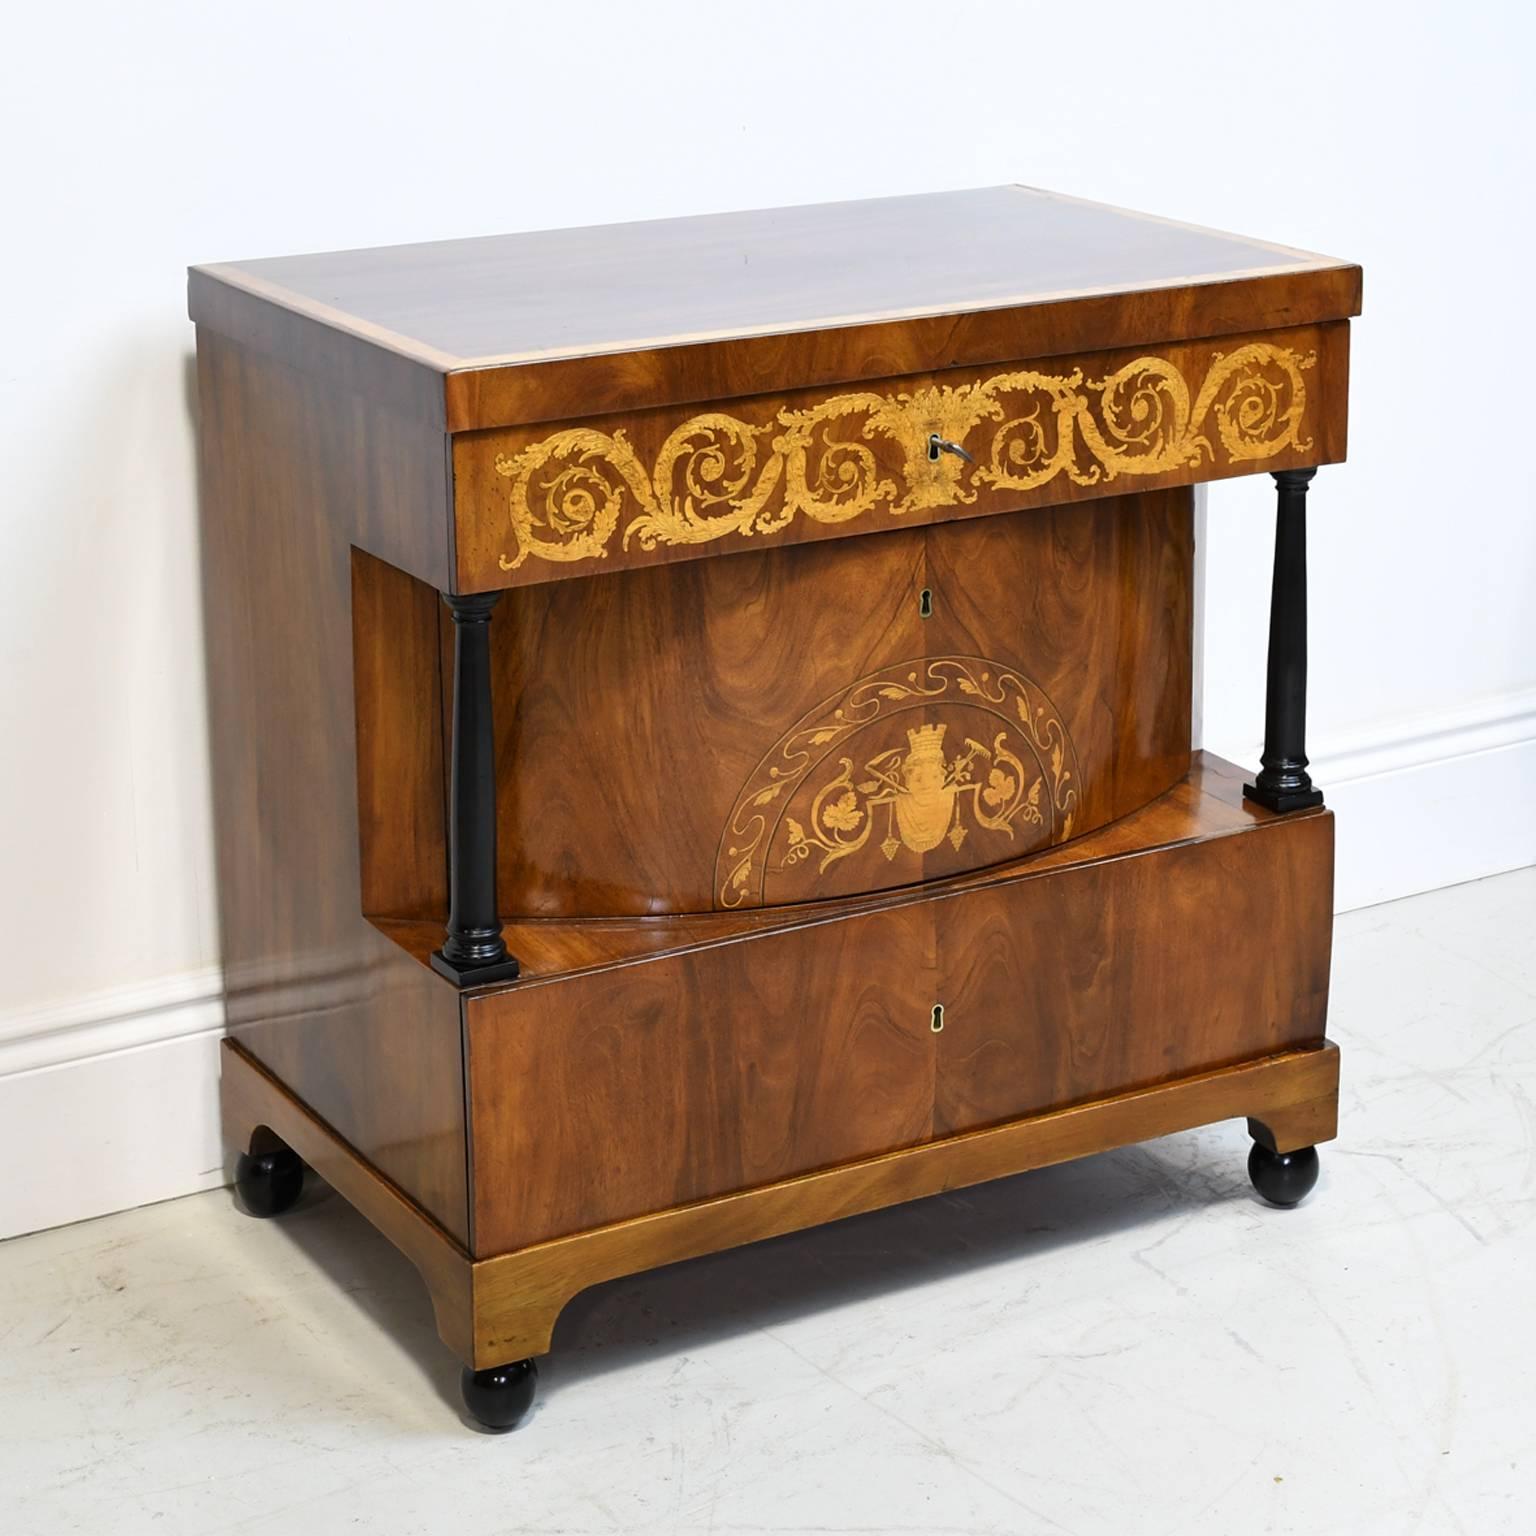 German 19th Century Biedermeier Chest of Drawers in Mahogany with Marquetry Inlays